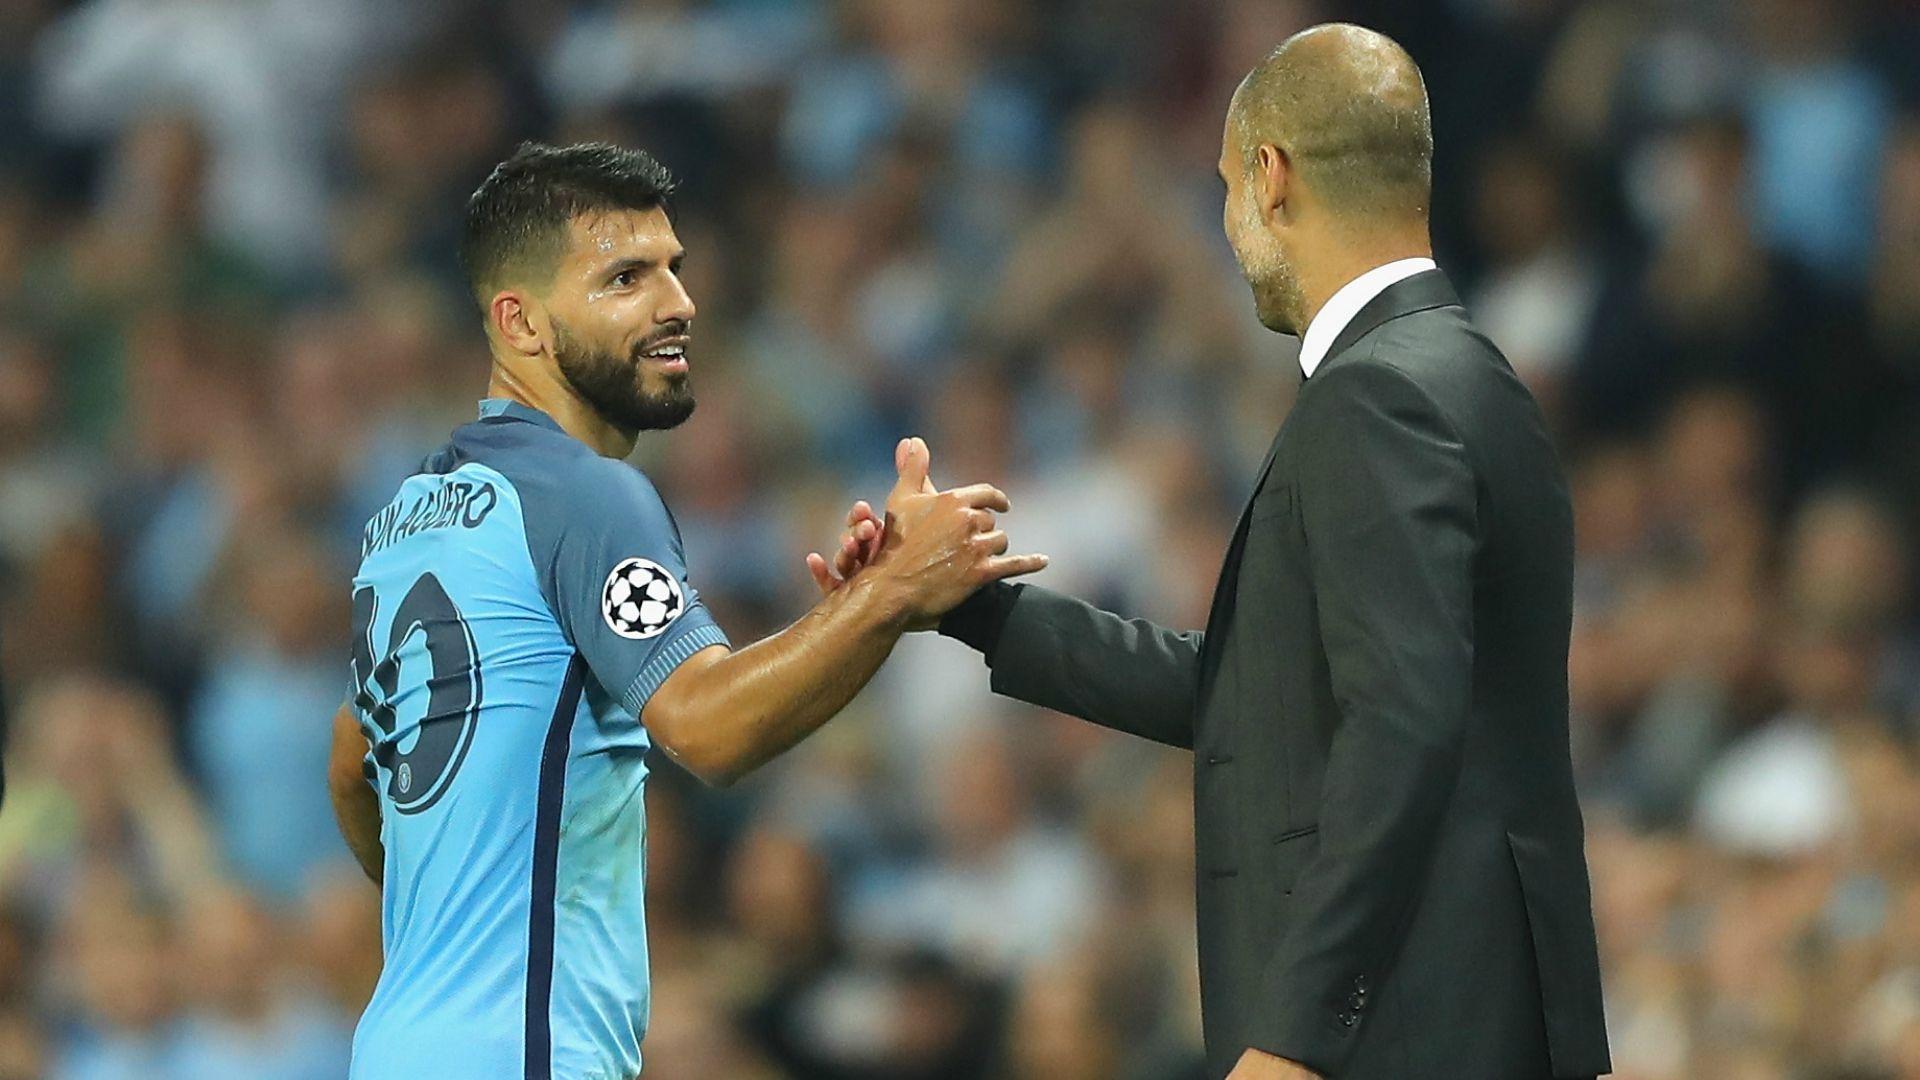 Has Pep Guardiola made Manchester City more exciting?